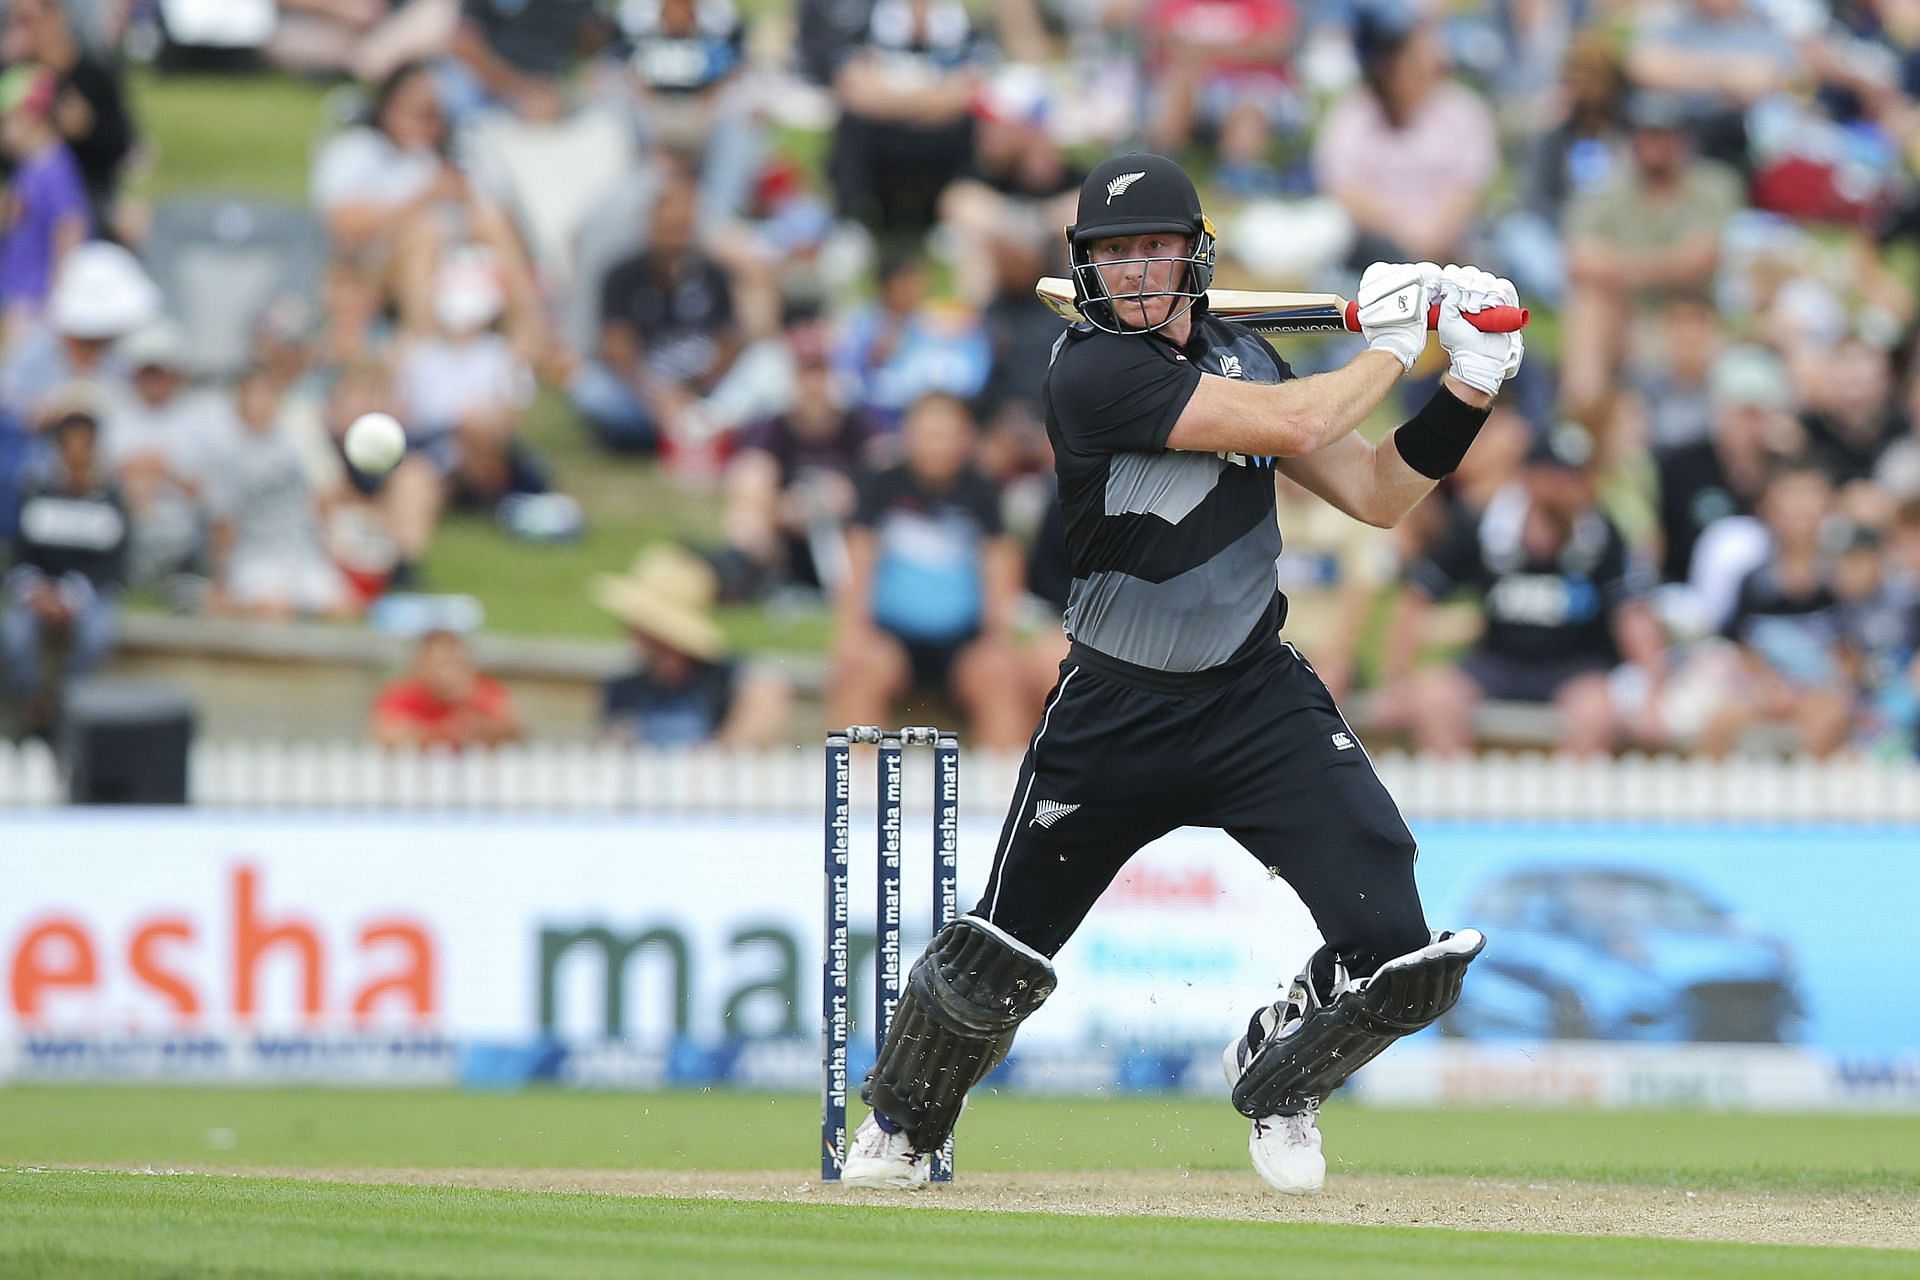 Martin Guptill has been one of the biggest stars of the shortest format over the years